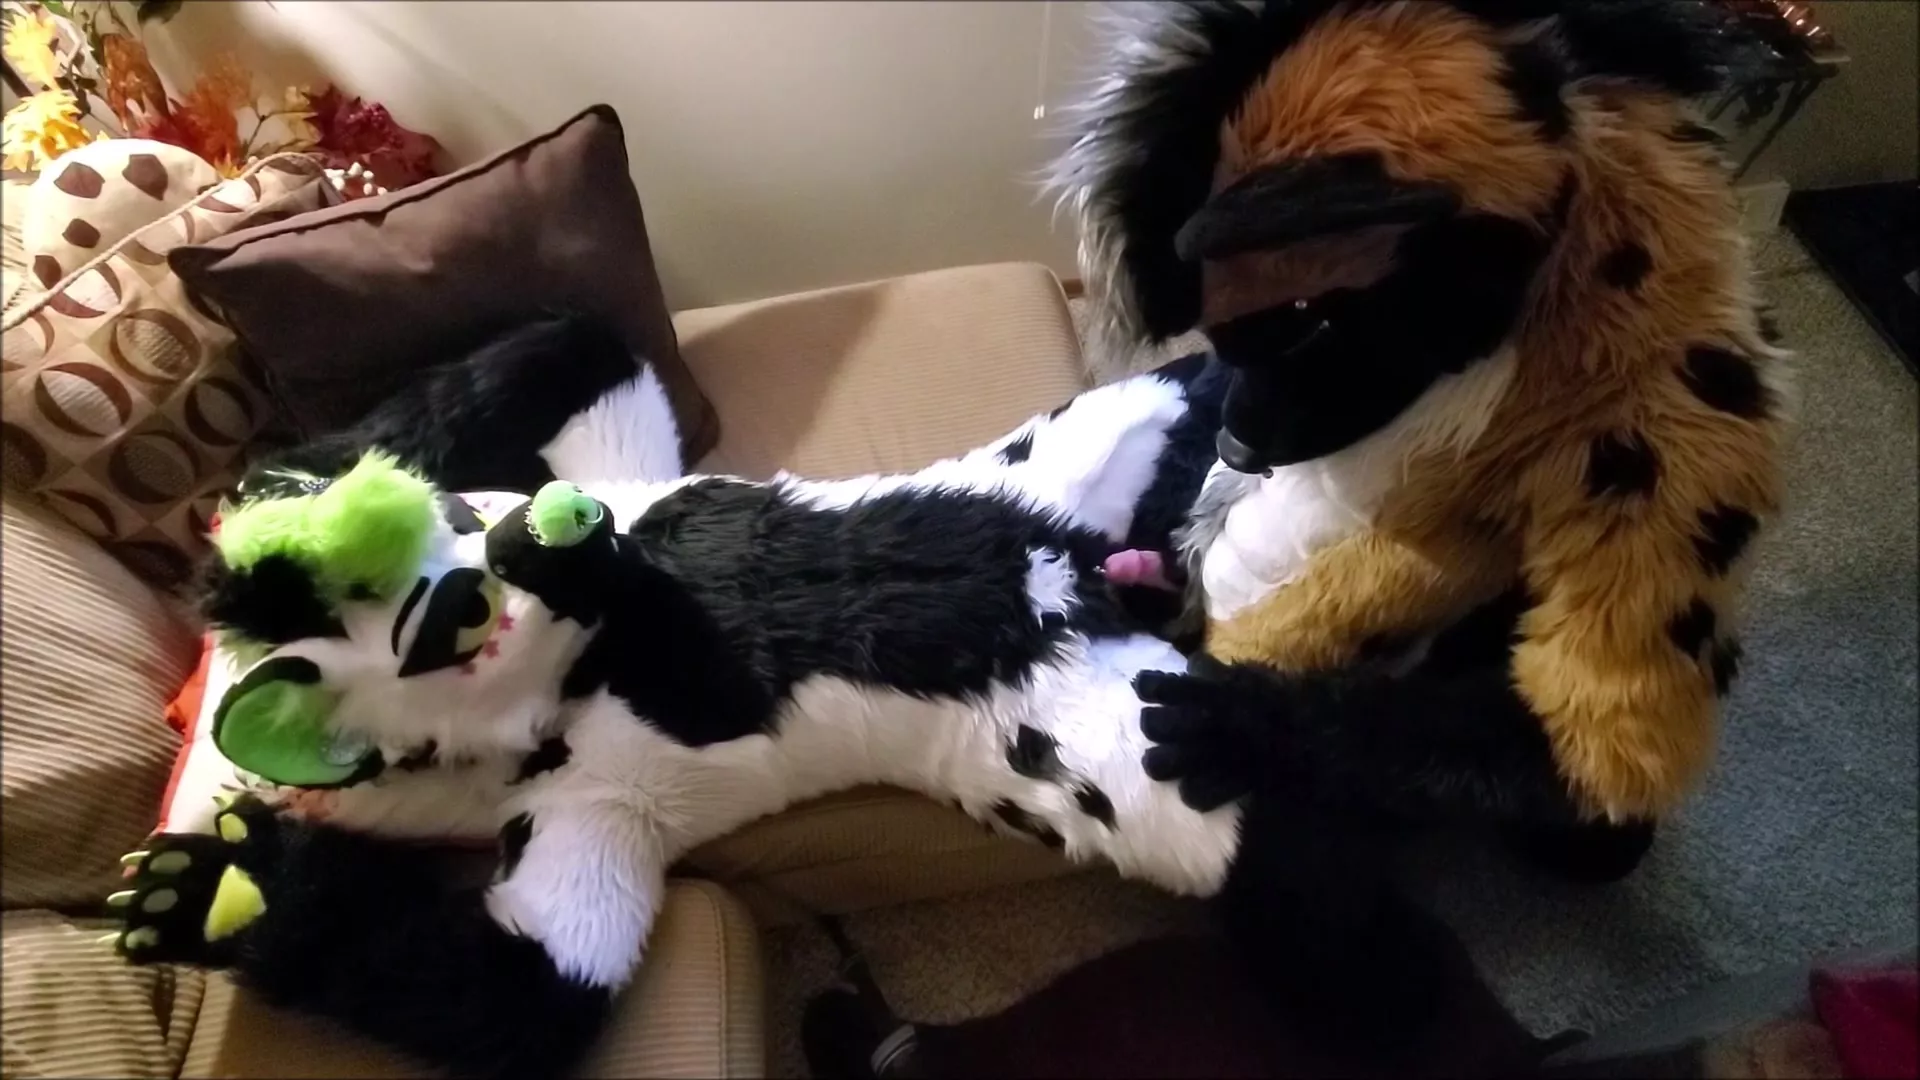 Shemale Fursuit Porn - Fetish amateur couple in fursuit costumes tease each other before fucking  passionately. New HD porn on faponhd